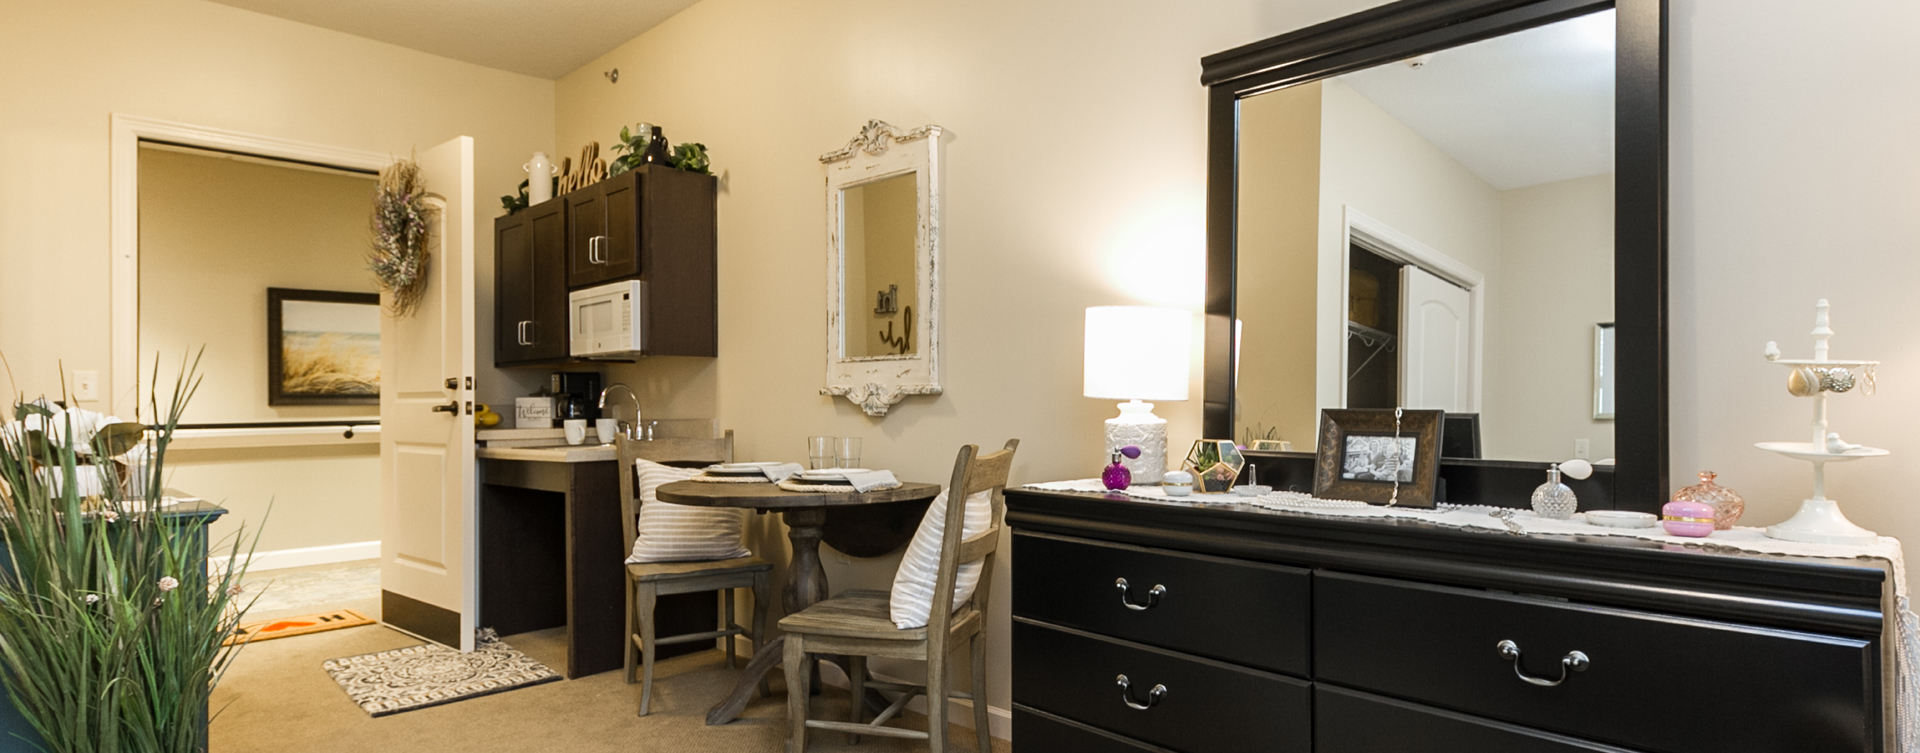 Personalize and decorate to your unique tastes an apartment at Bickford of Virginia Beach